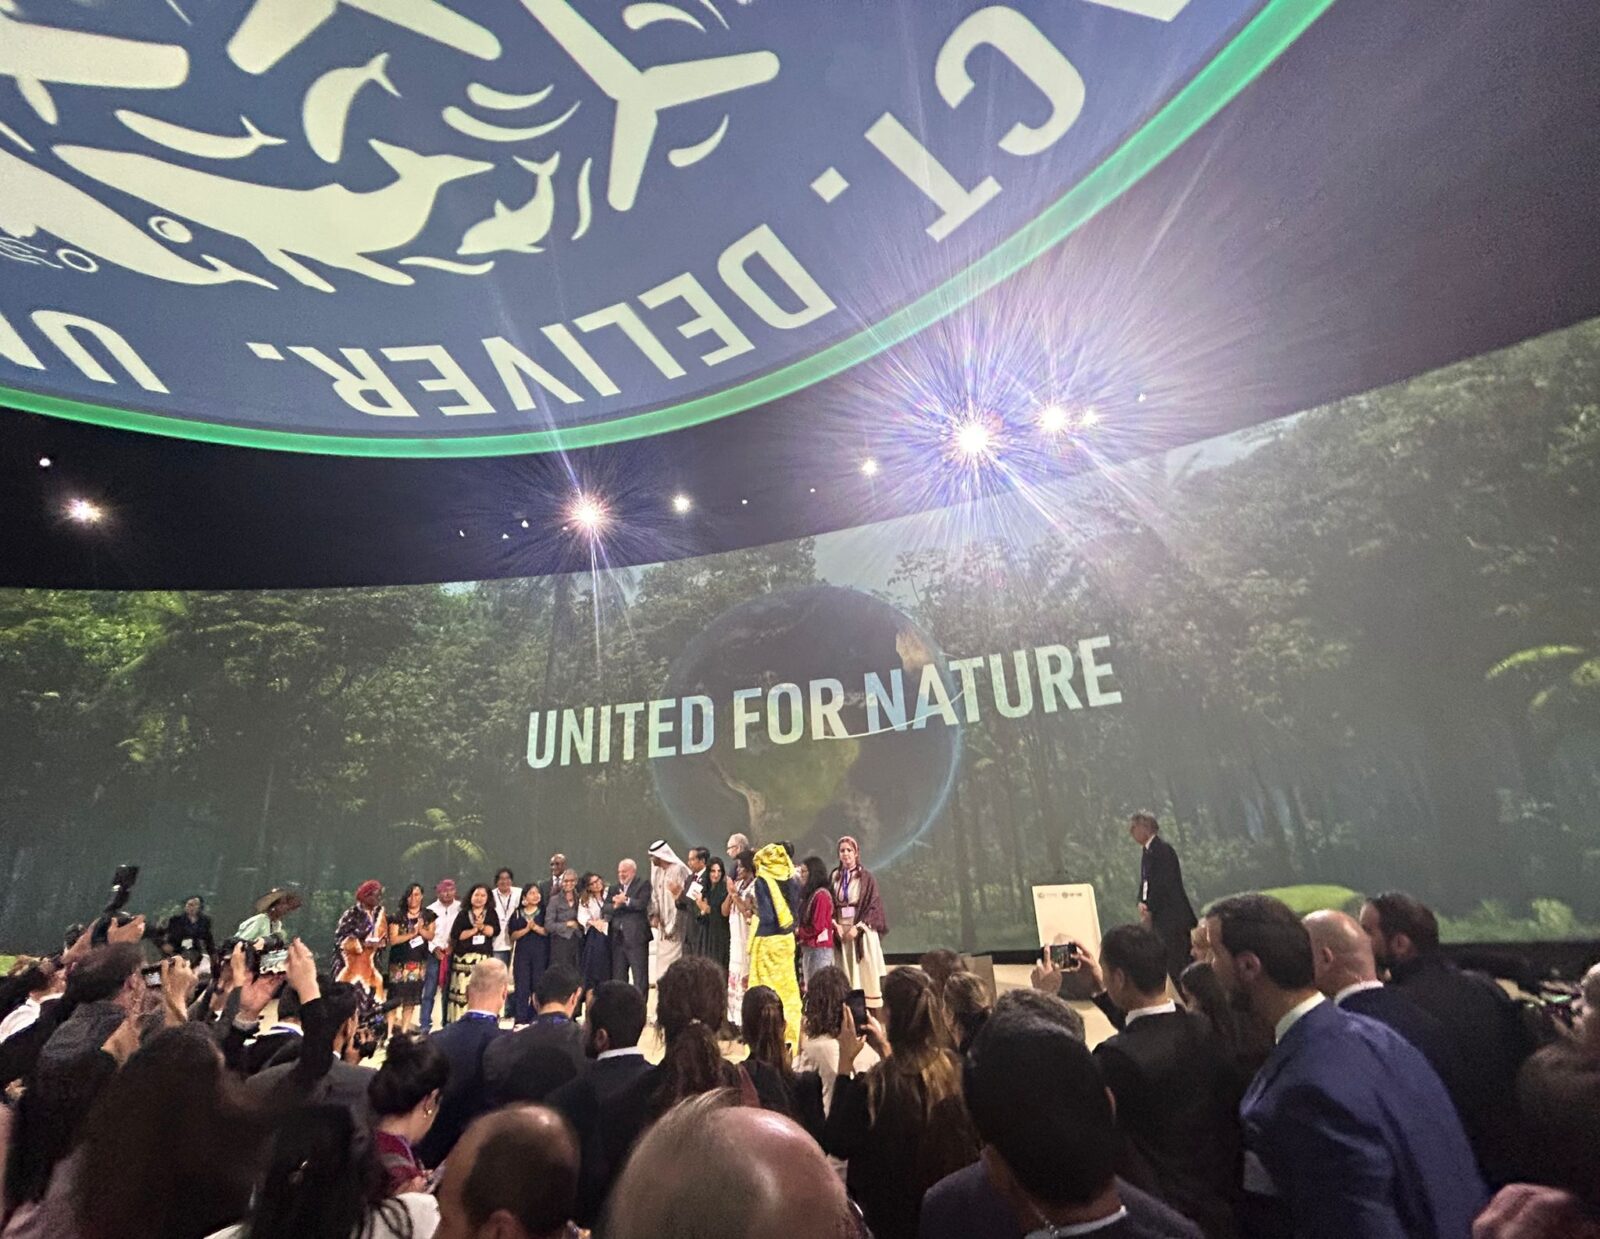 A group of people stand on a stage in front of an audience. A large screen behind those onstage reads, "UNITED FOR NATURE".